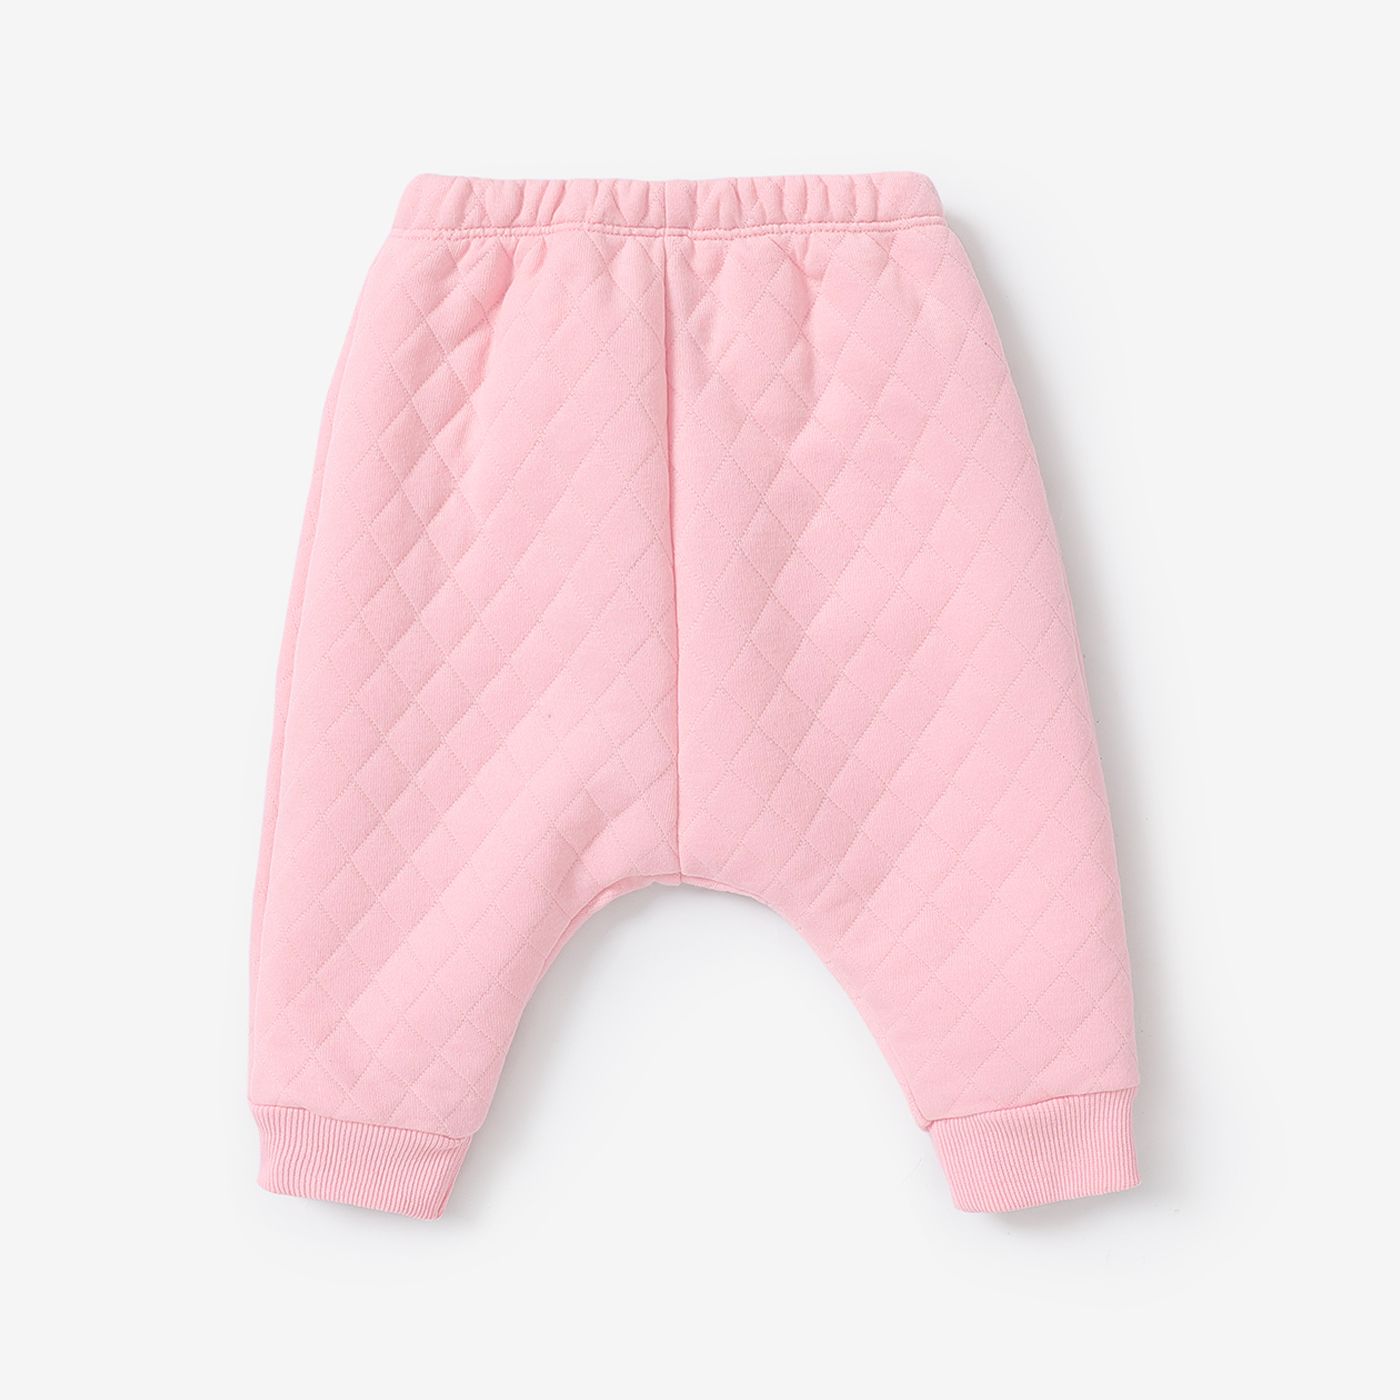 Baby Girl's Solid Color Cotton Casual Soft Textured Material Pants With Patch Pocket